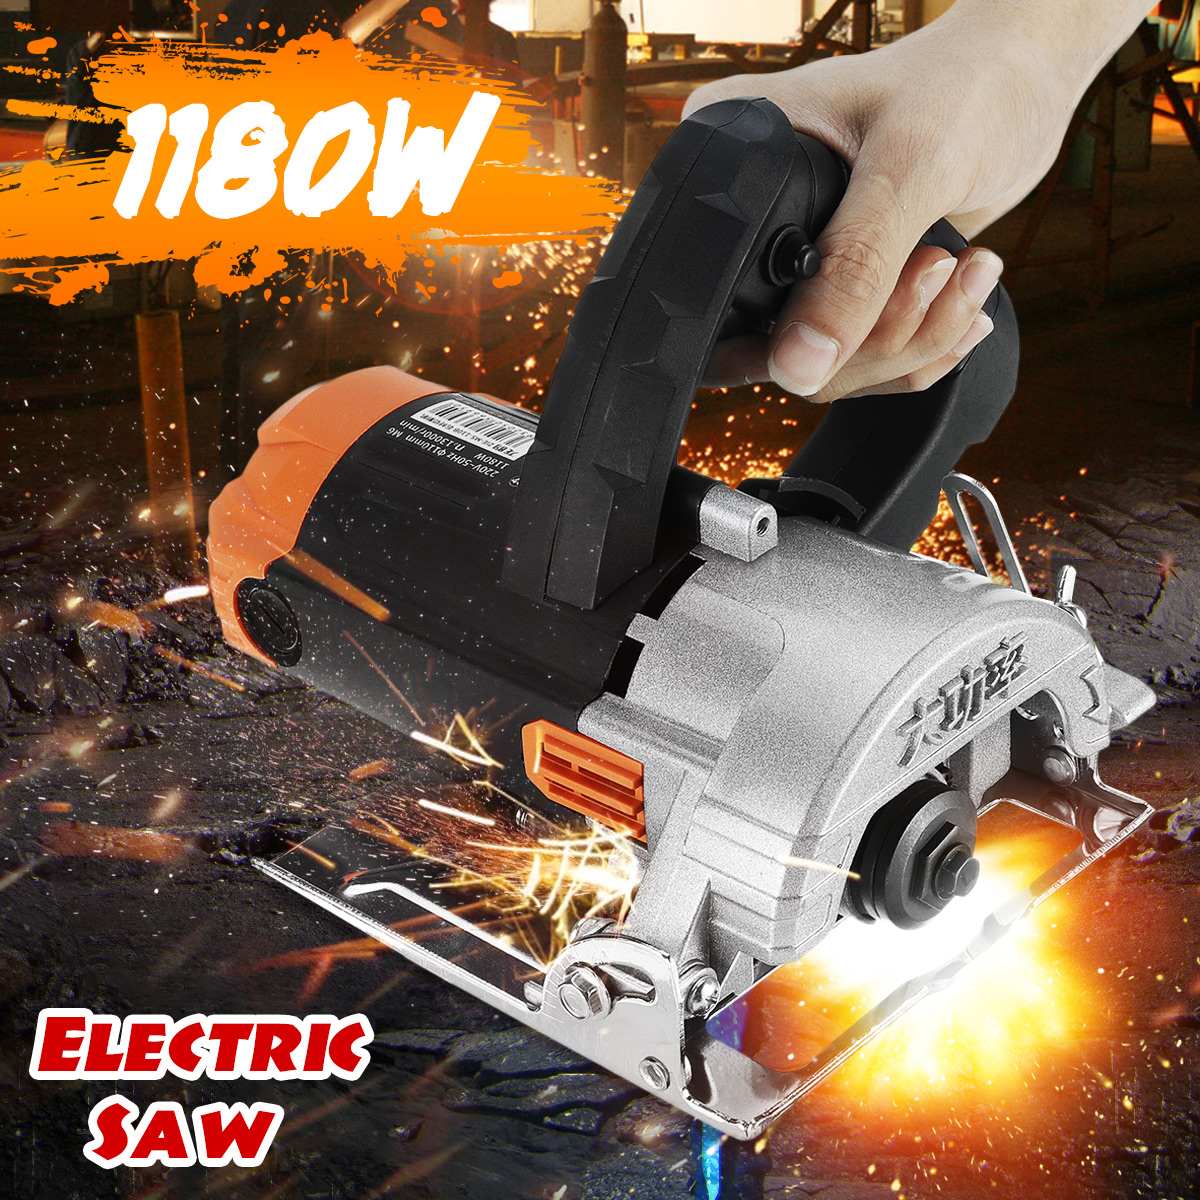 13000RPM High Speed 1180W Electric Saw Motors 110mm Blade Wood Metal portable Cutting Machine Wire Saw Ceramic Marble tile Tool